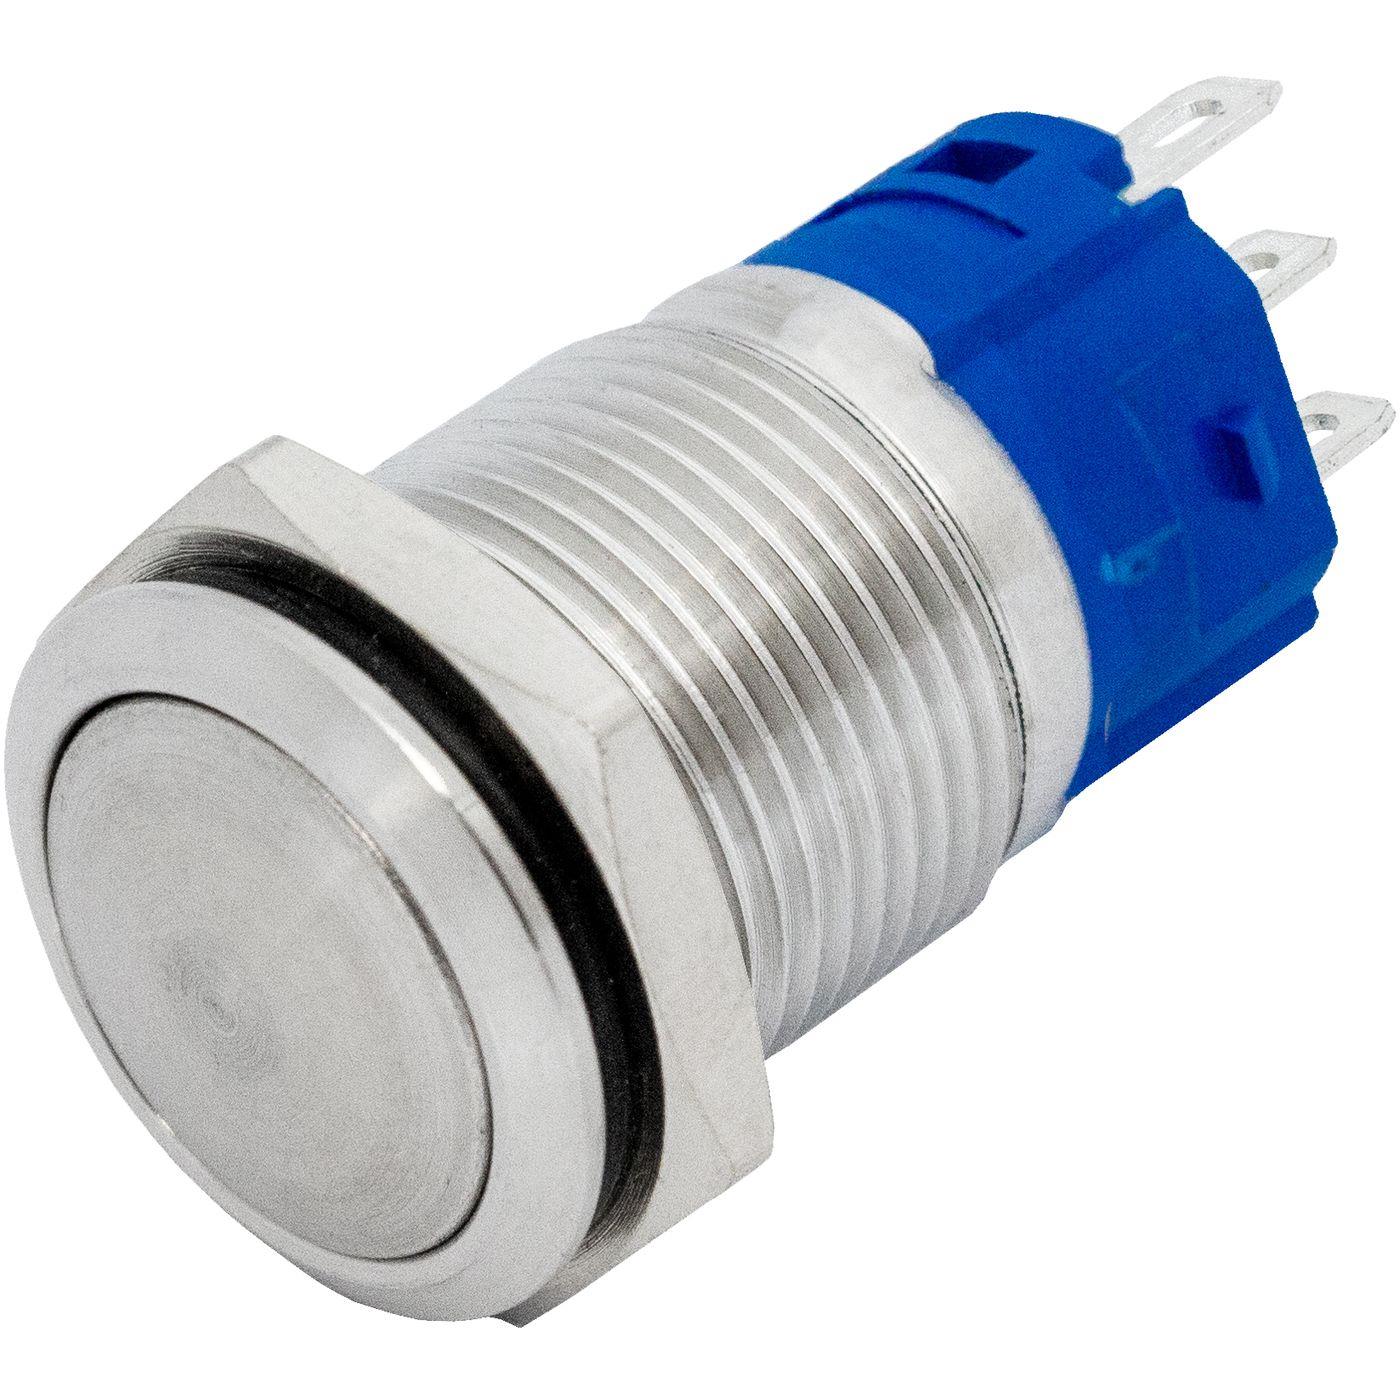 Stainless steel Pressure switch Flat Ø16mm IP65 2,8x0,5mm Pins 250V 3A Vandal-proof